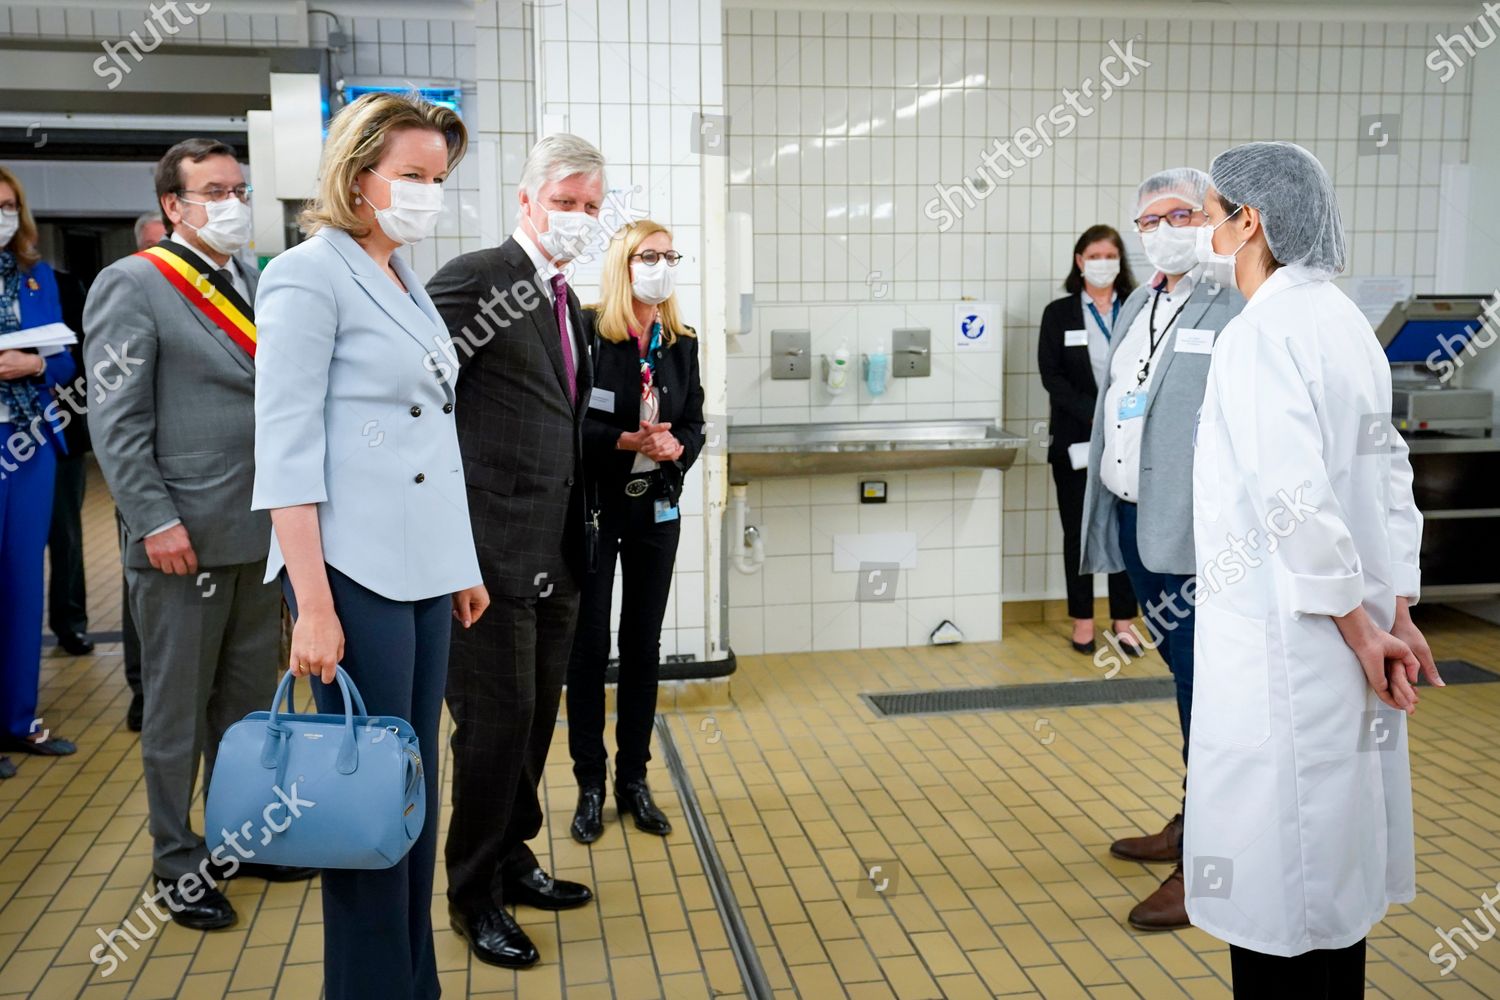 CASA REAL BELGA - Página 5 King-philippe-and-queen-mathilde-visit-to-the-centre-hospitalier-regional-chr-liege-belgium-shutterstock-editorial-10616438at